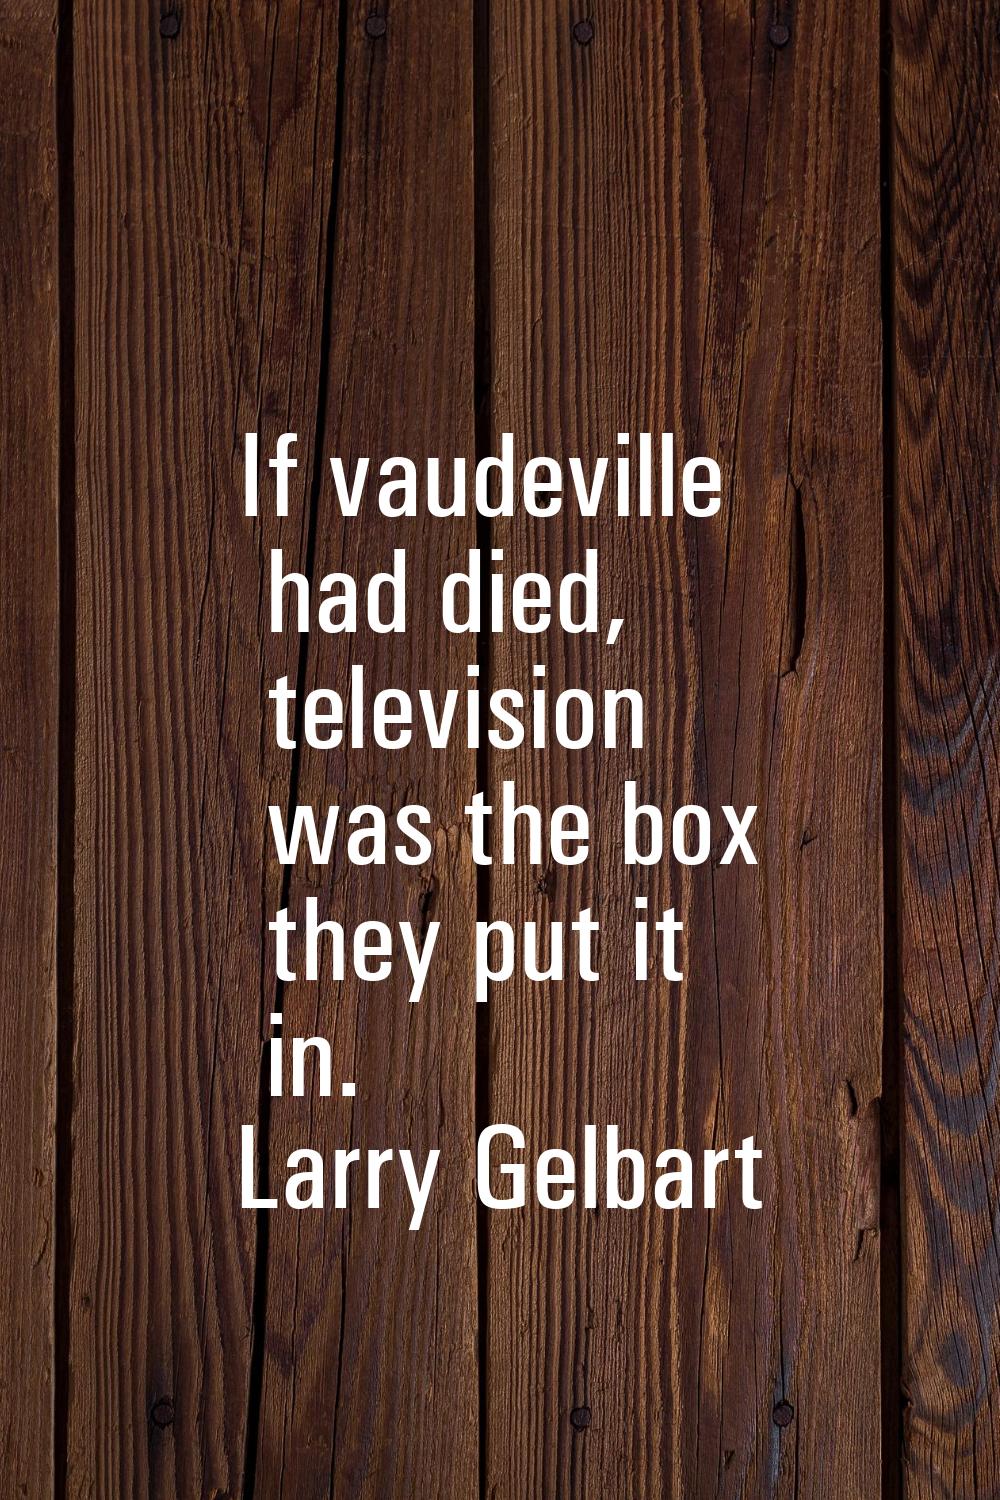 If vaudeville had died, television was the box they put it in.